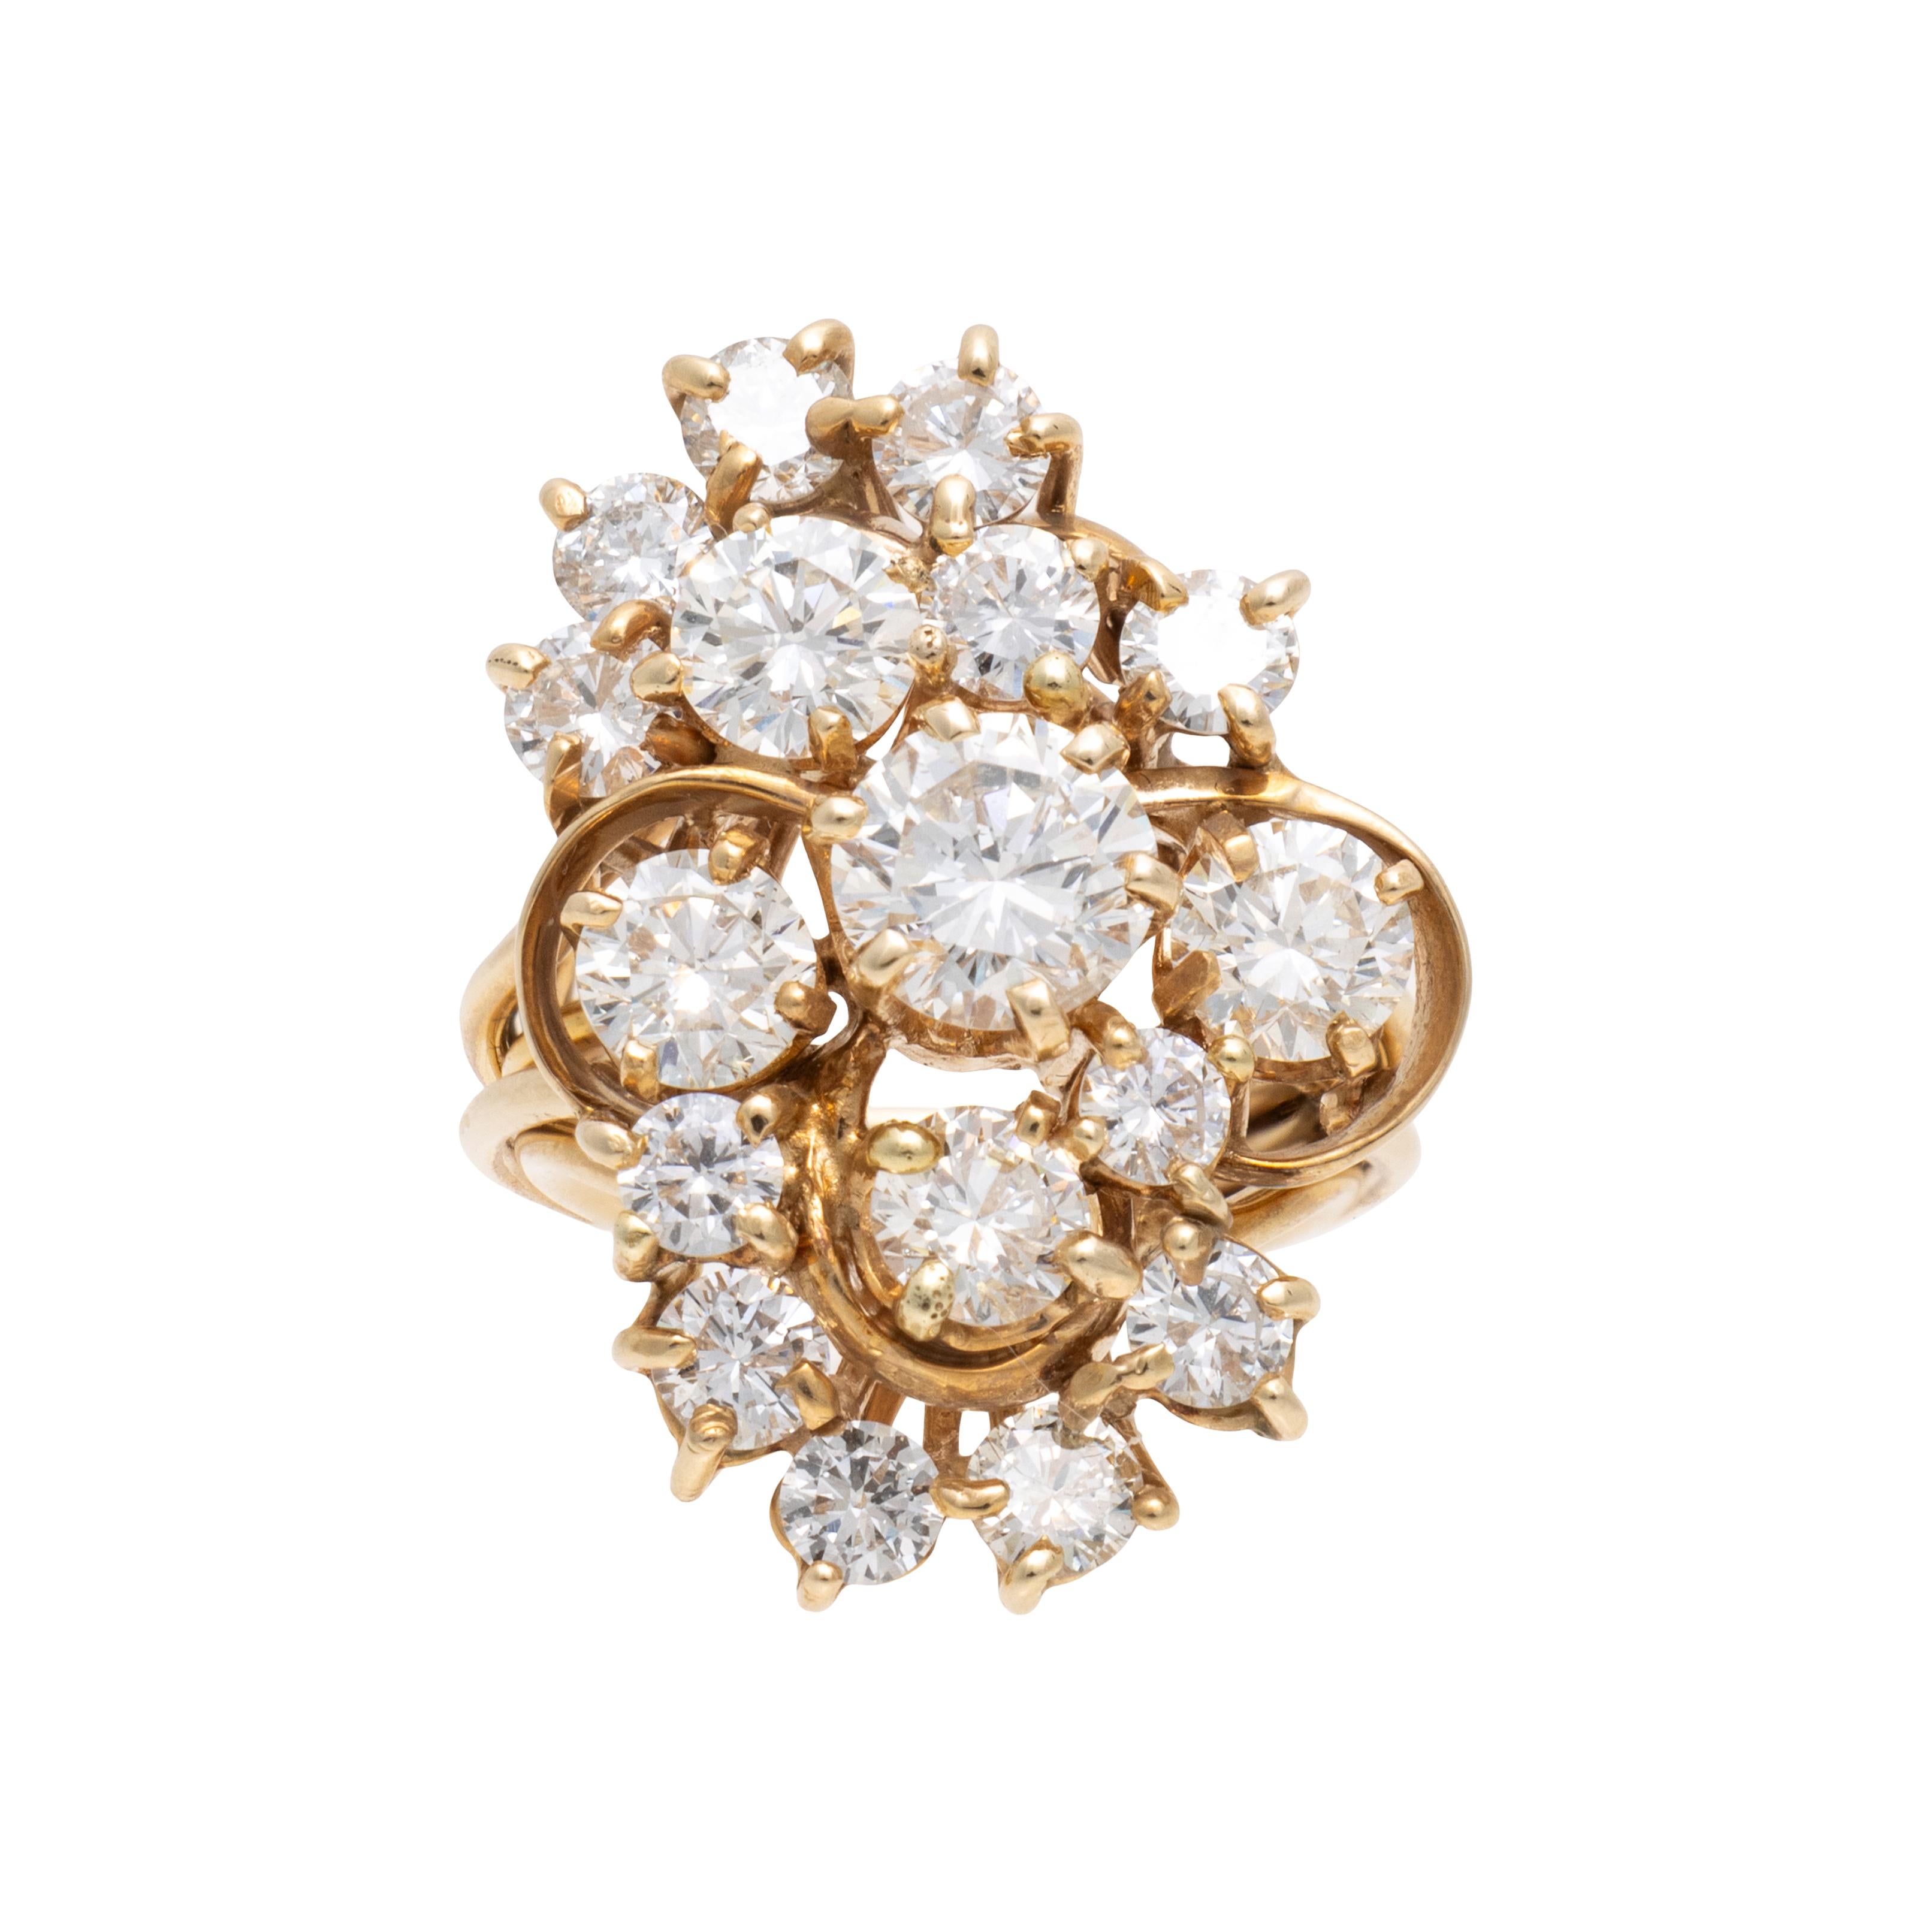 14kt yellow gold diamond cluster ring with 4 larger natural mined diamonds ranging from .42 to .50 carats (VSI to VS2), and 12 natural mined diamonds ranging from .14 to .20 carat each. Total weight 4.02 carats. Clarity of diamonds VS2 to SI1, G-J